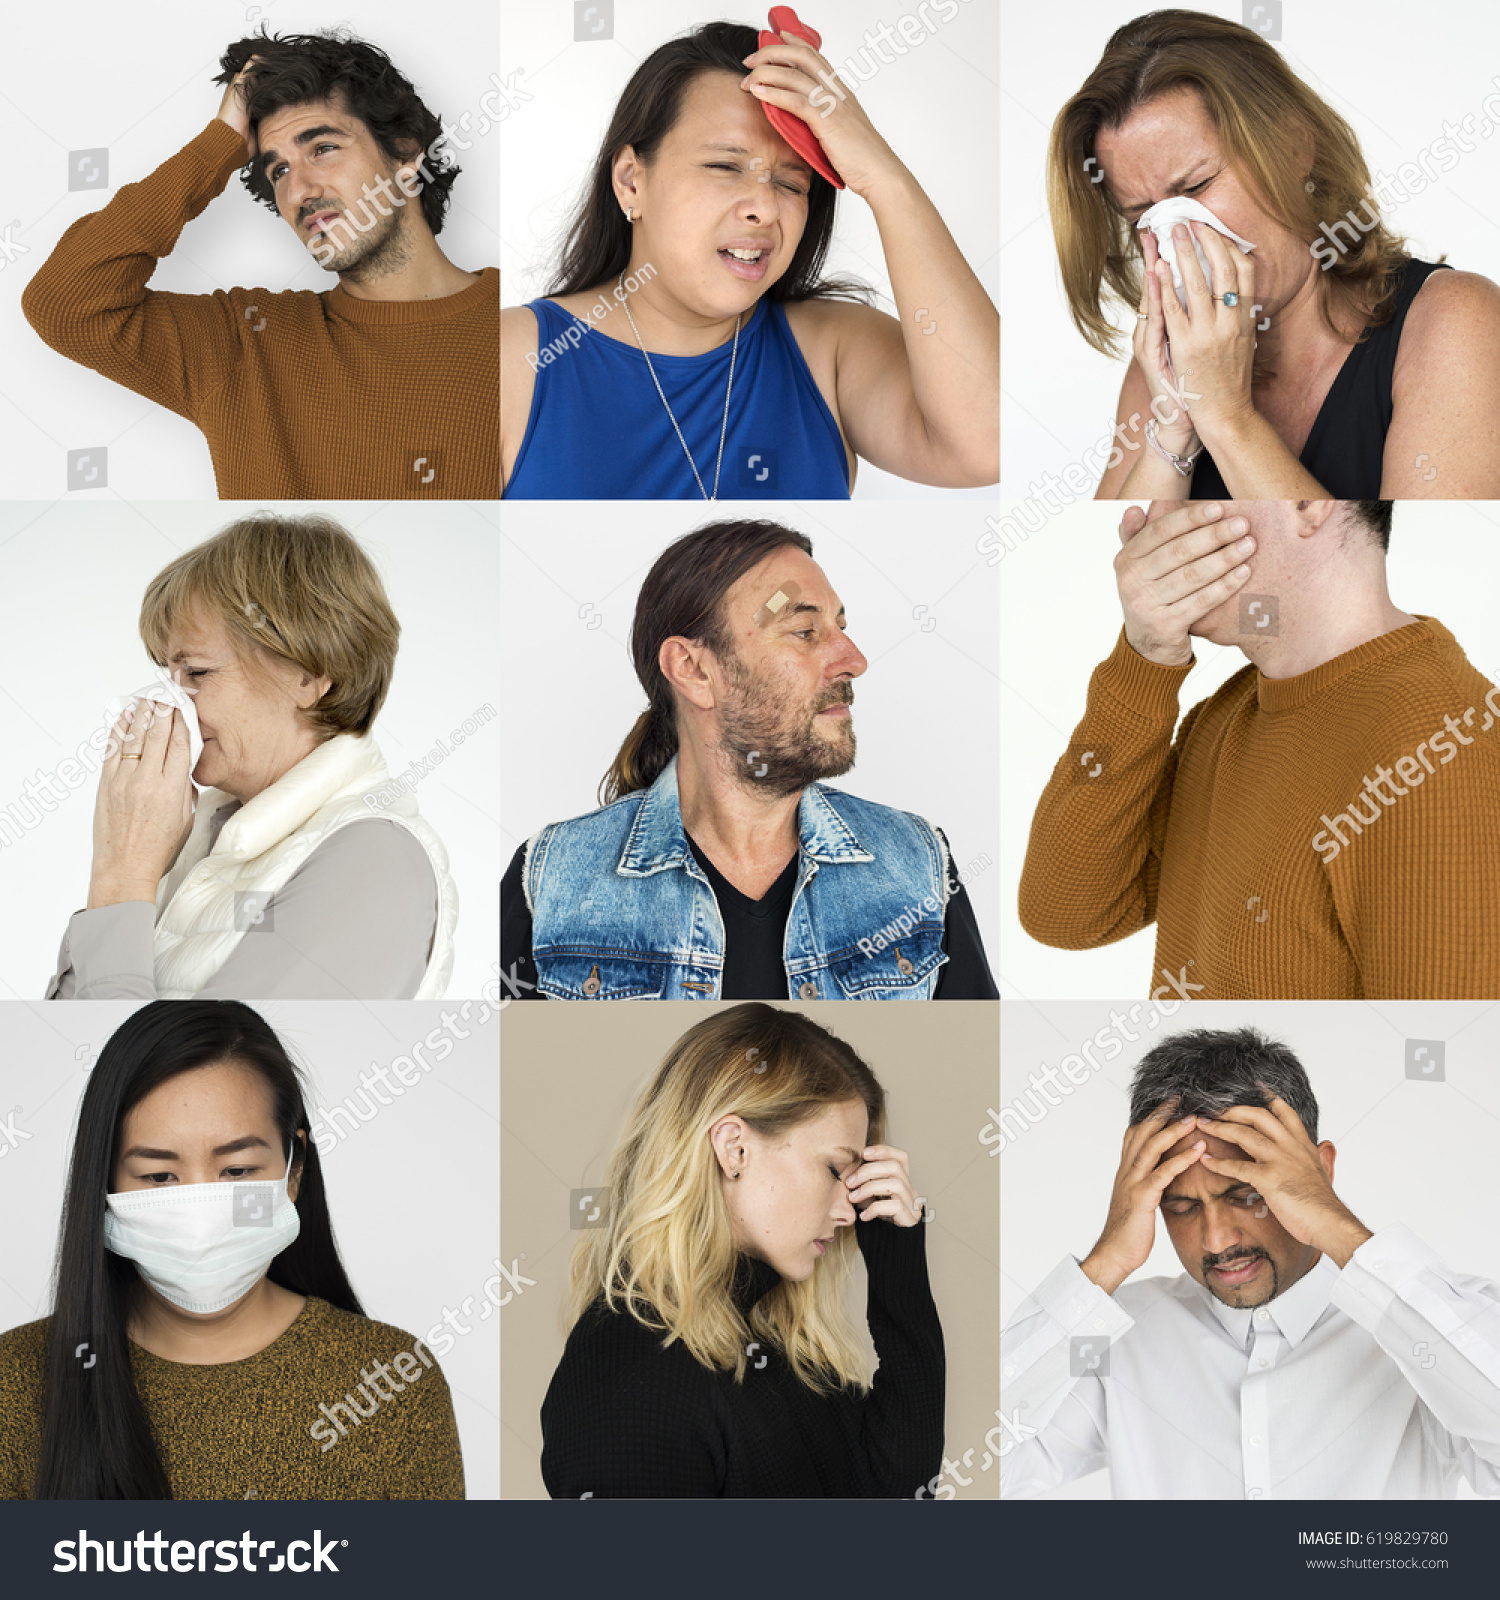 Collages diverse people illness symptoms #619829780